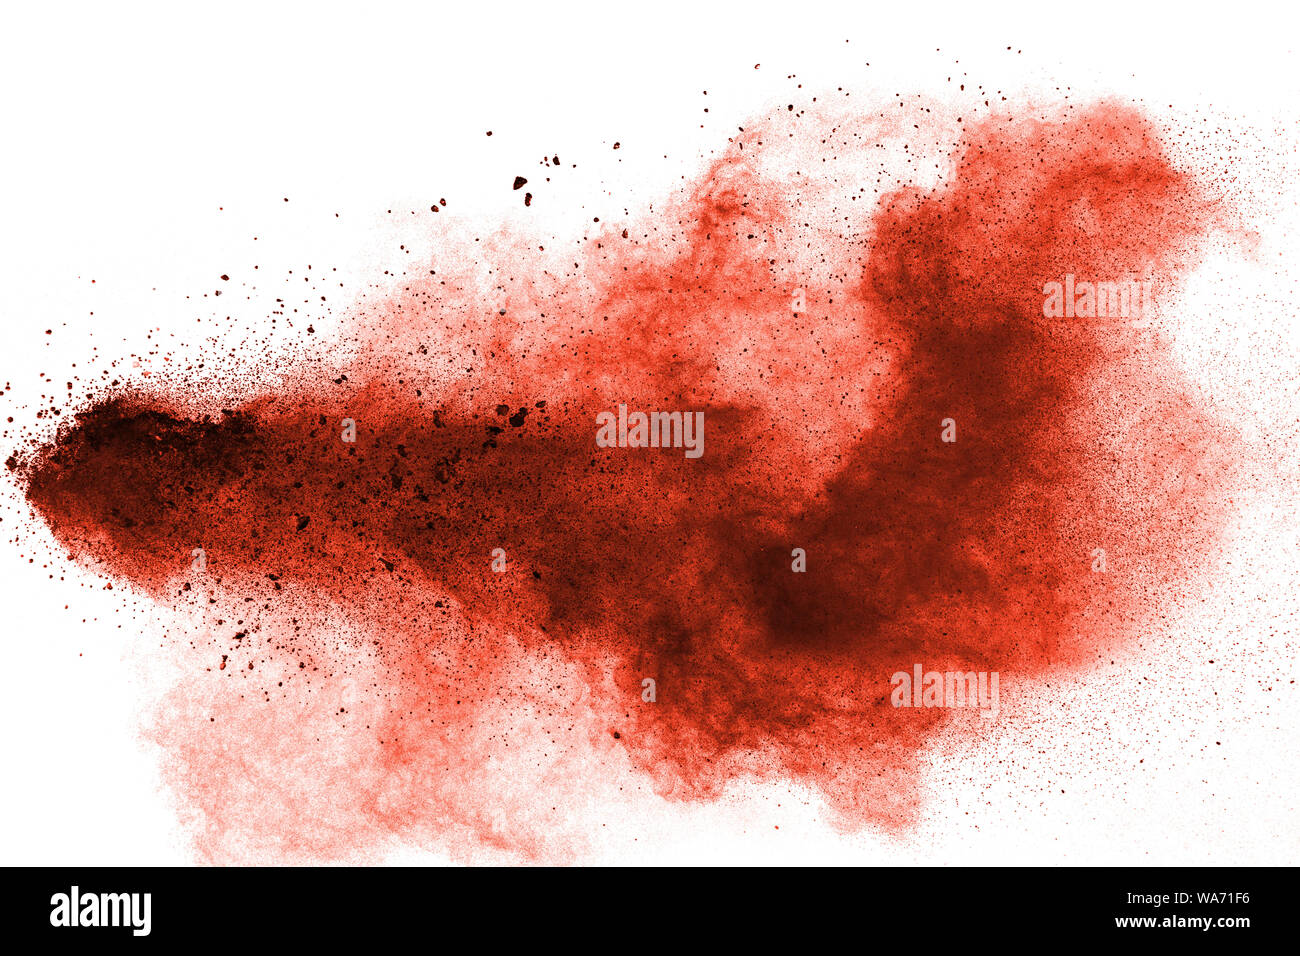 abstract red dust splattered on white background. Red powder explosion. Stock Photo